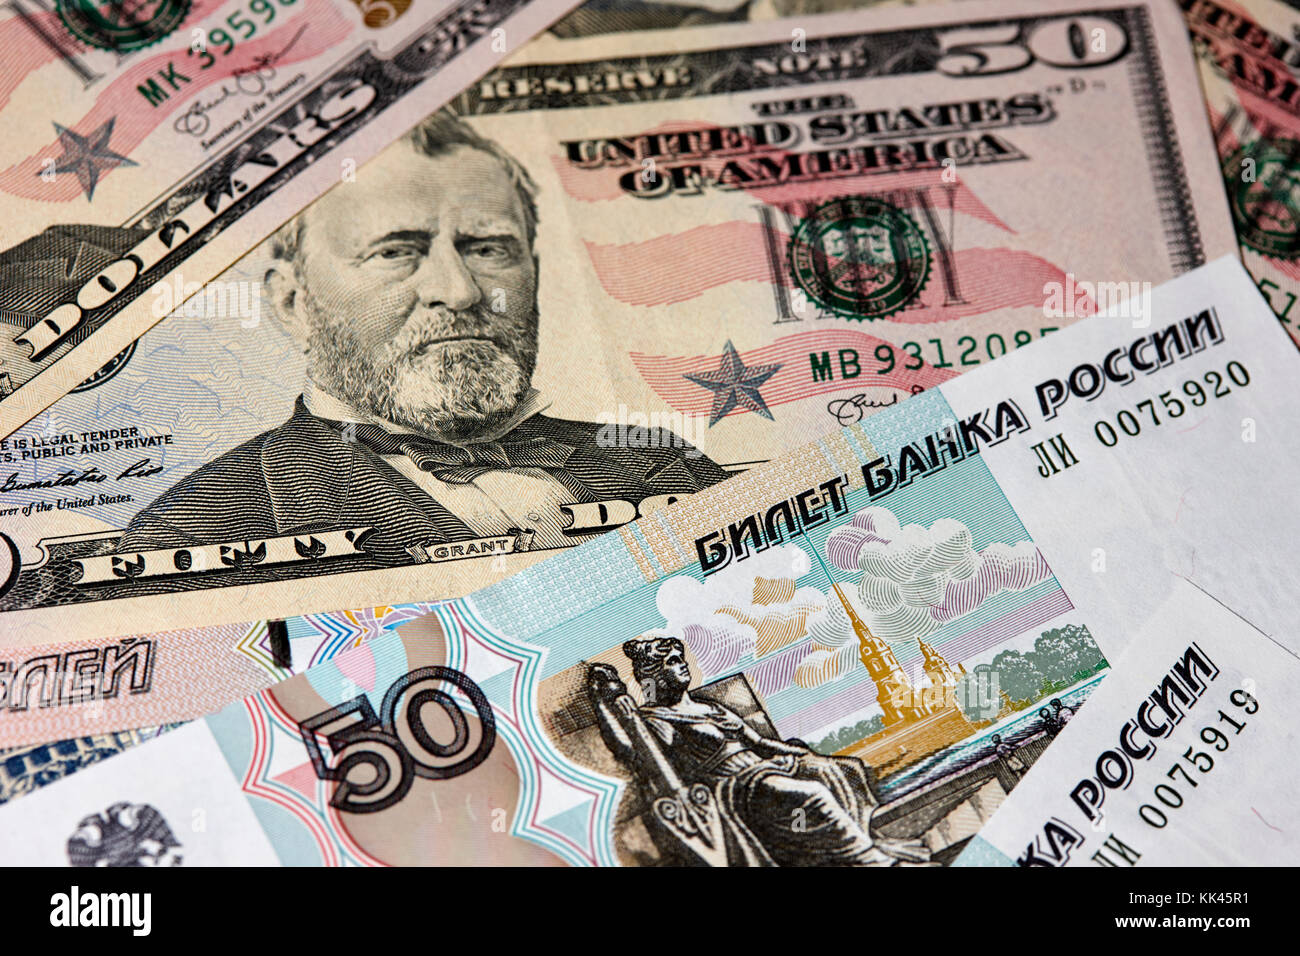 us dollars and russian roubles cash banknotes Stock Photo